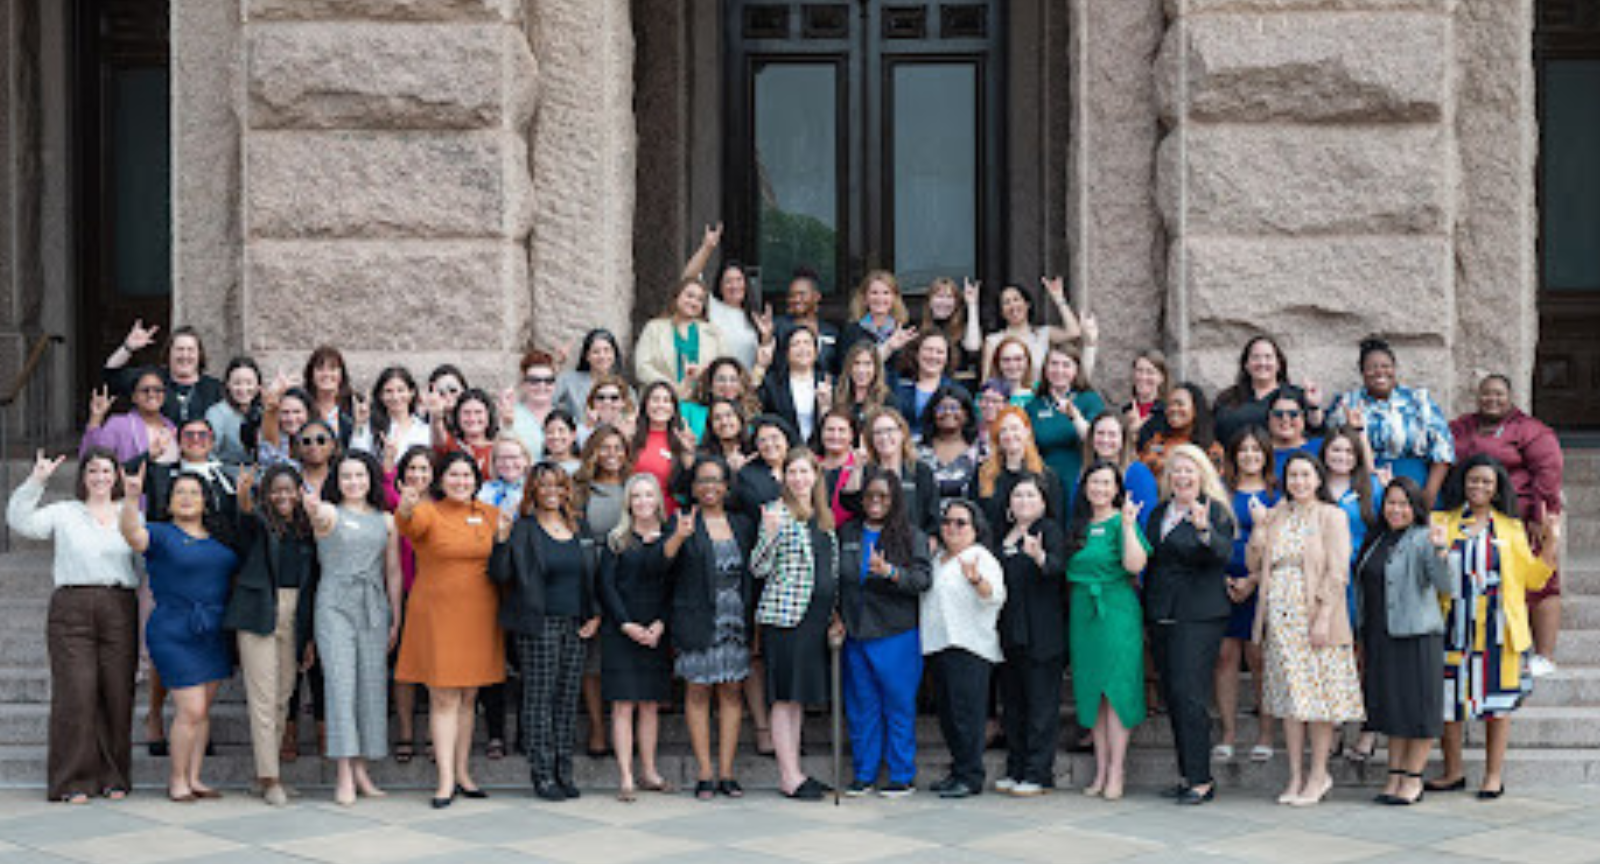 The fourth cohort of the LBJ Women's Campaign School gather on the steps of the Texas Capitol in Austin.